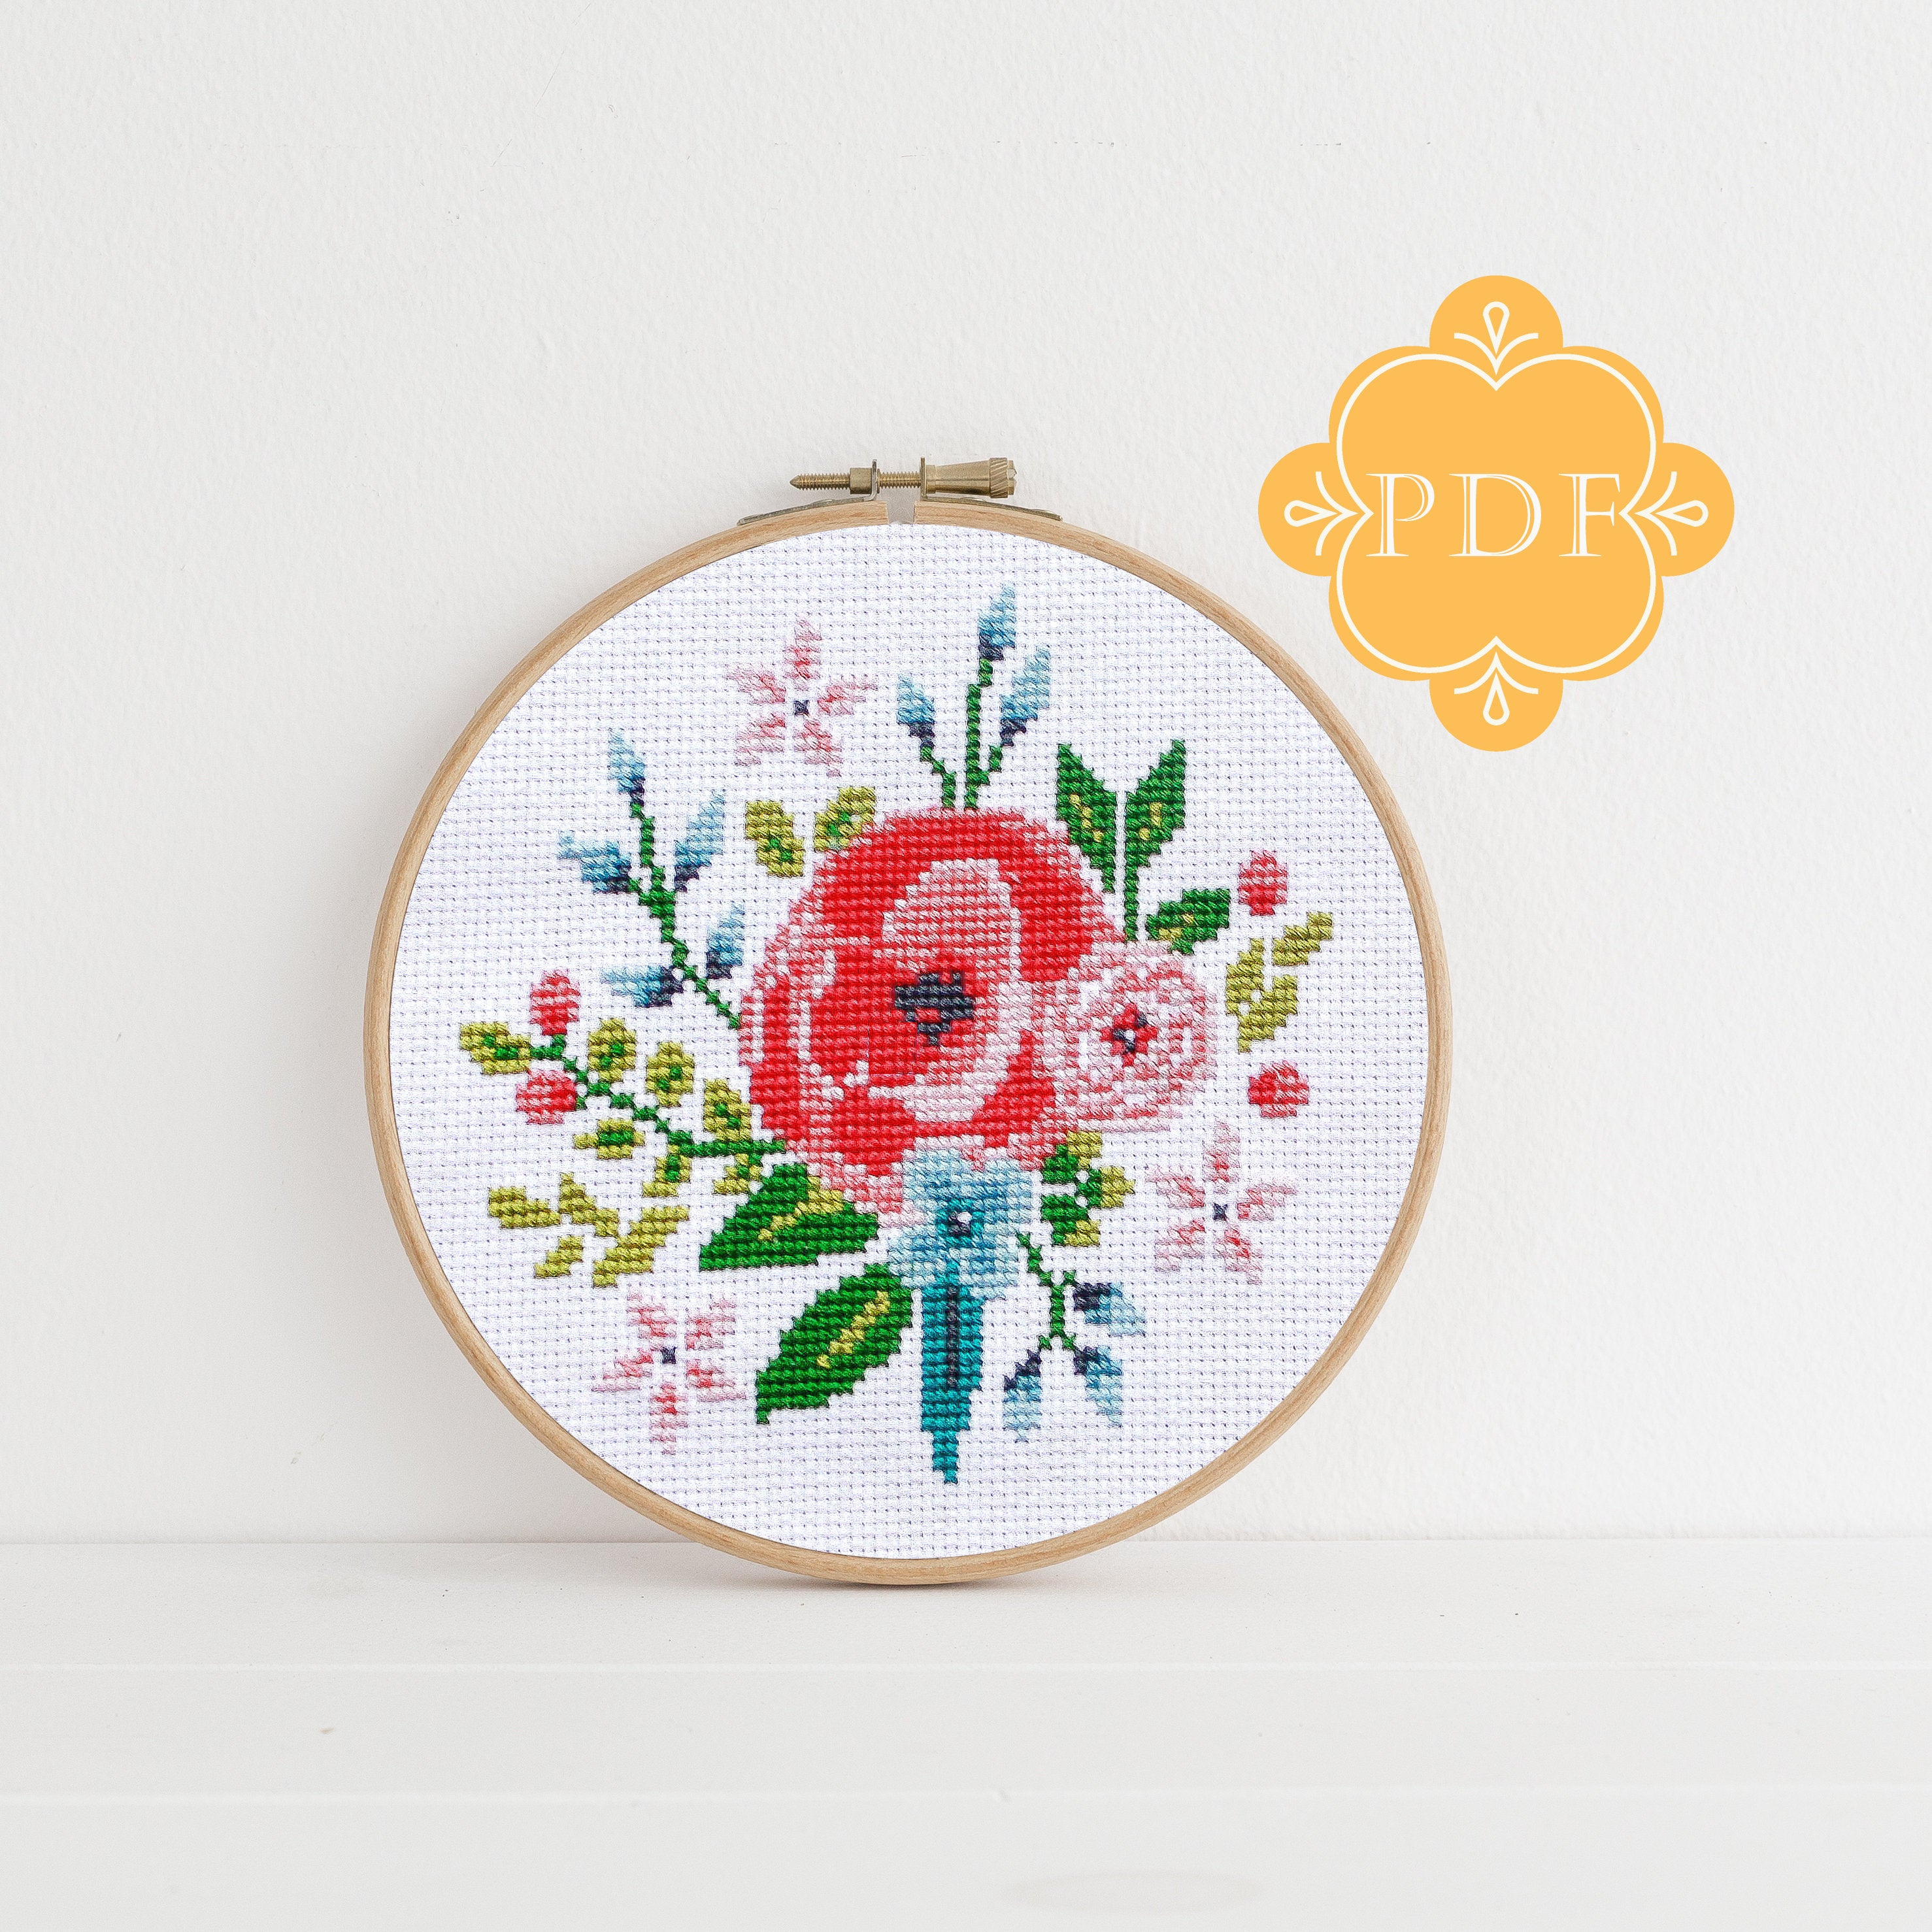 Vintage Floral Embroidery Patterns Pdf Counted Cross Stitch Vintage Floral Cross Stitch Pattern